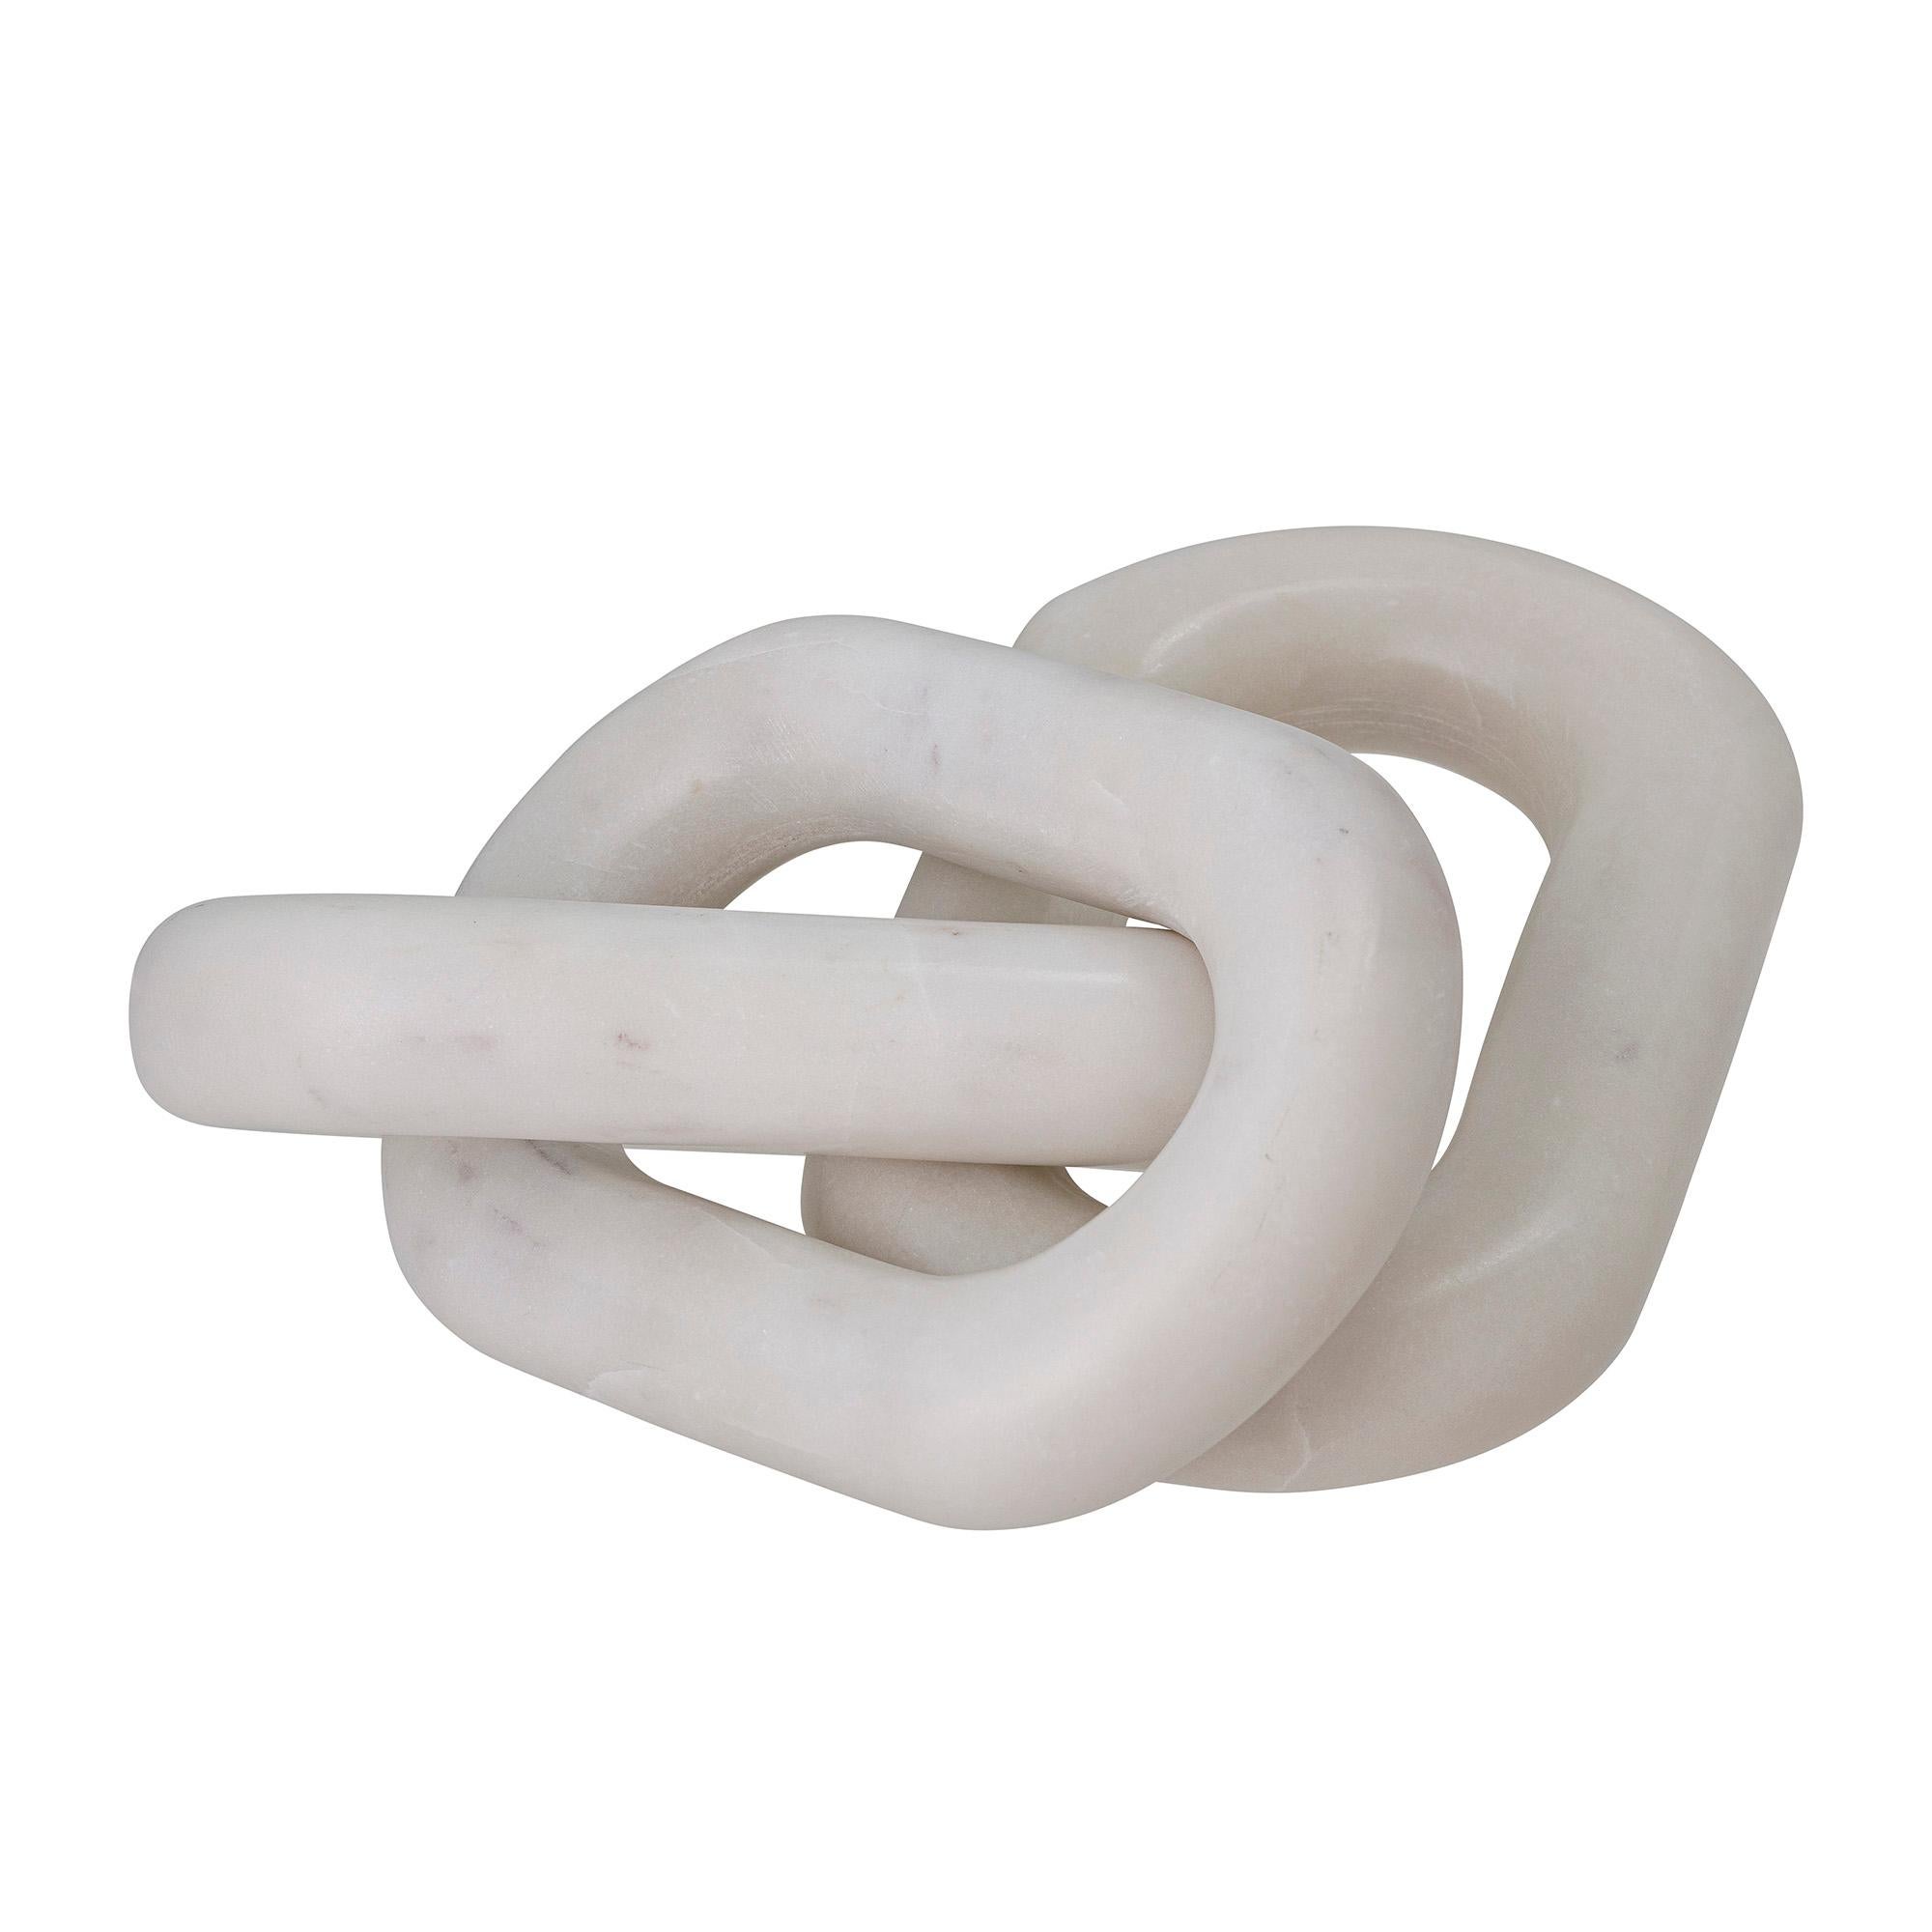 Organic decorative table top sculpture hand carved from white marble with a honed finish, this piece is composed of three interconnected looping rings that can arranged in variable positions. This small decorative sculpture has an interesting